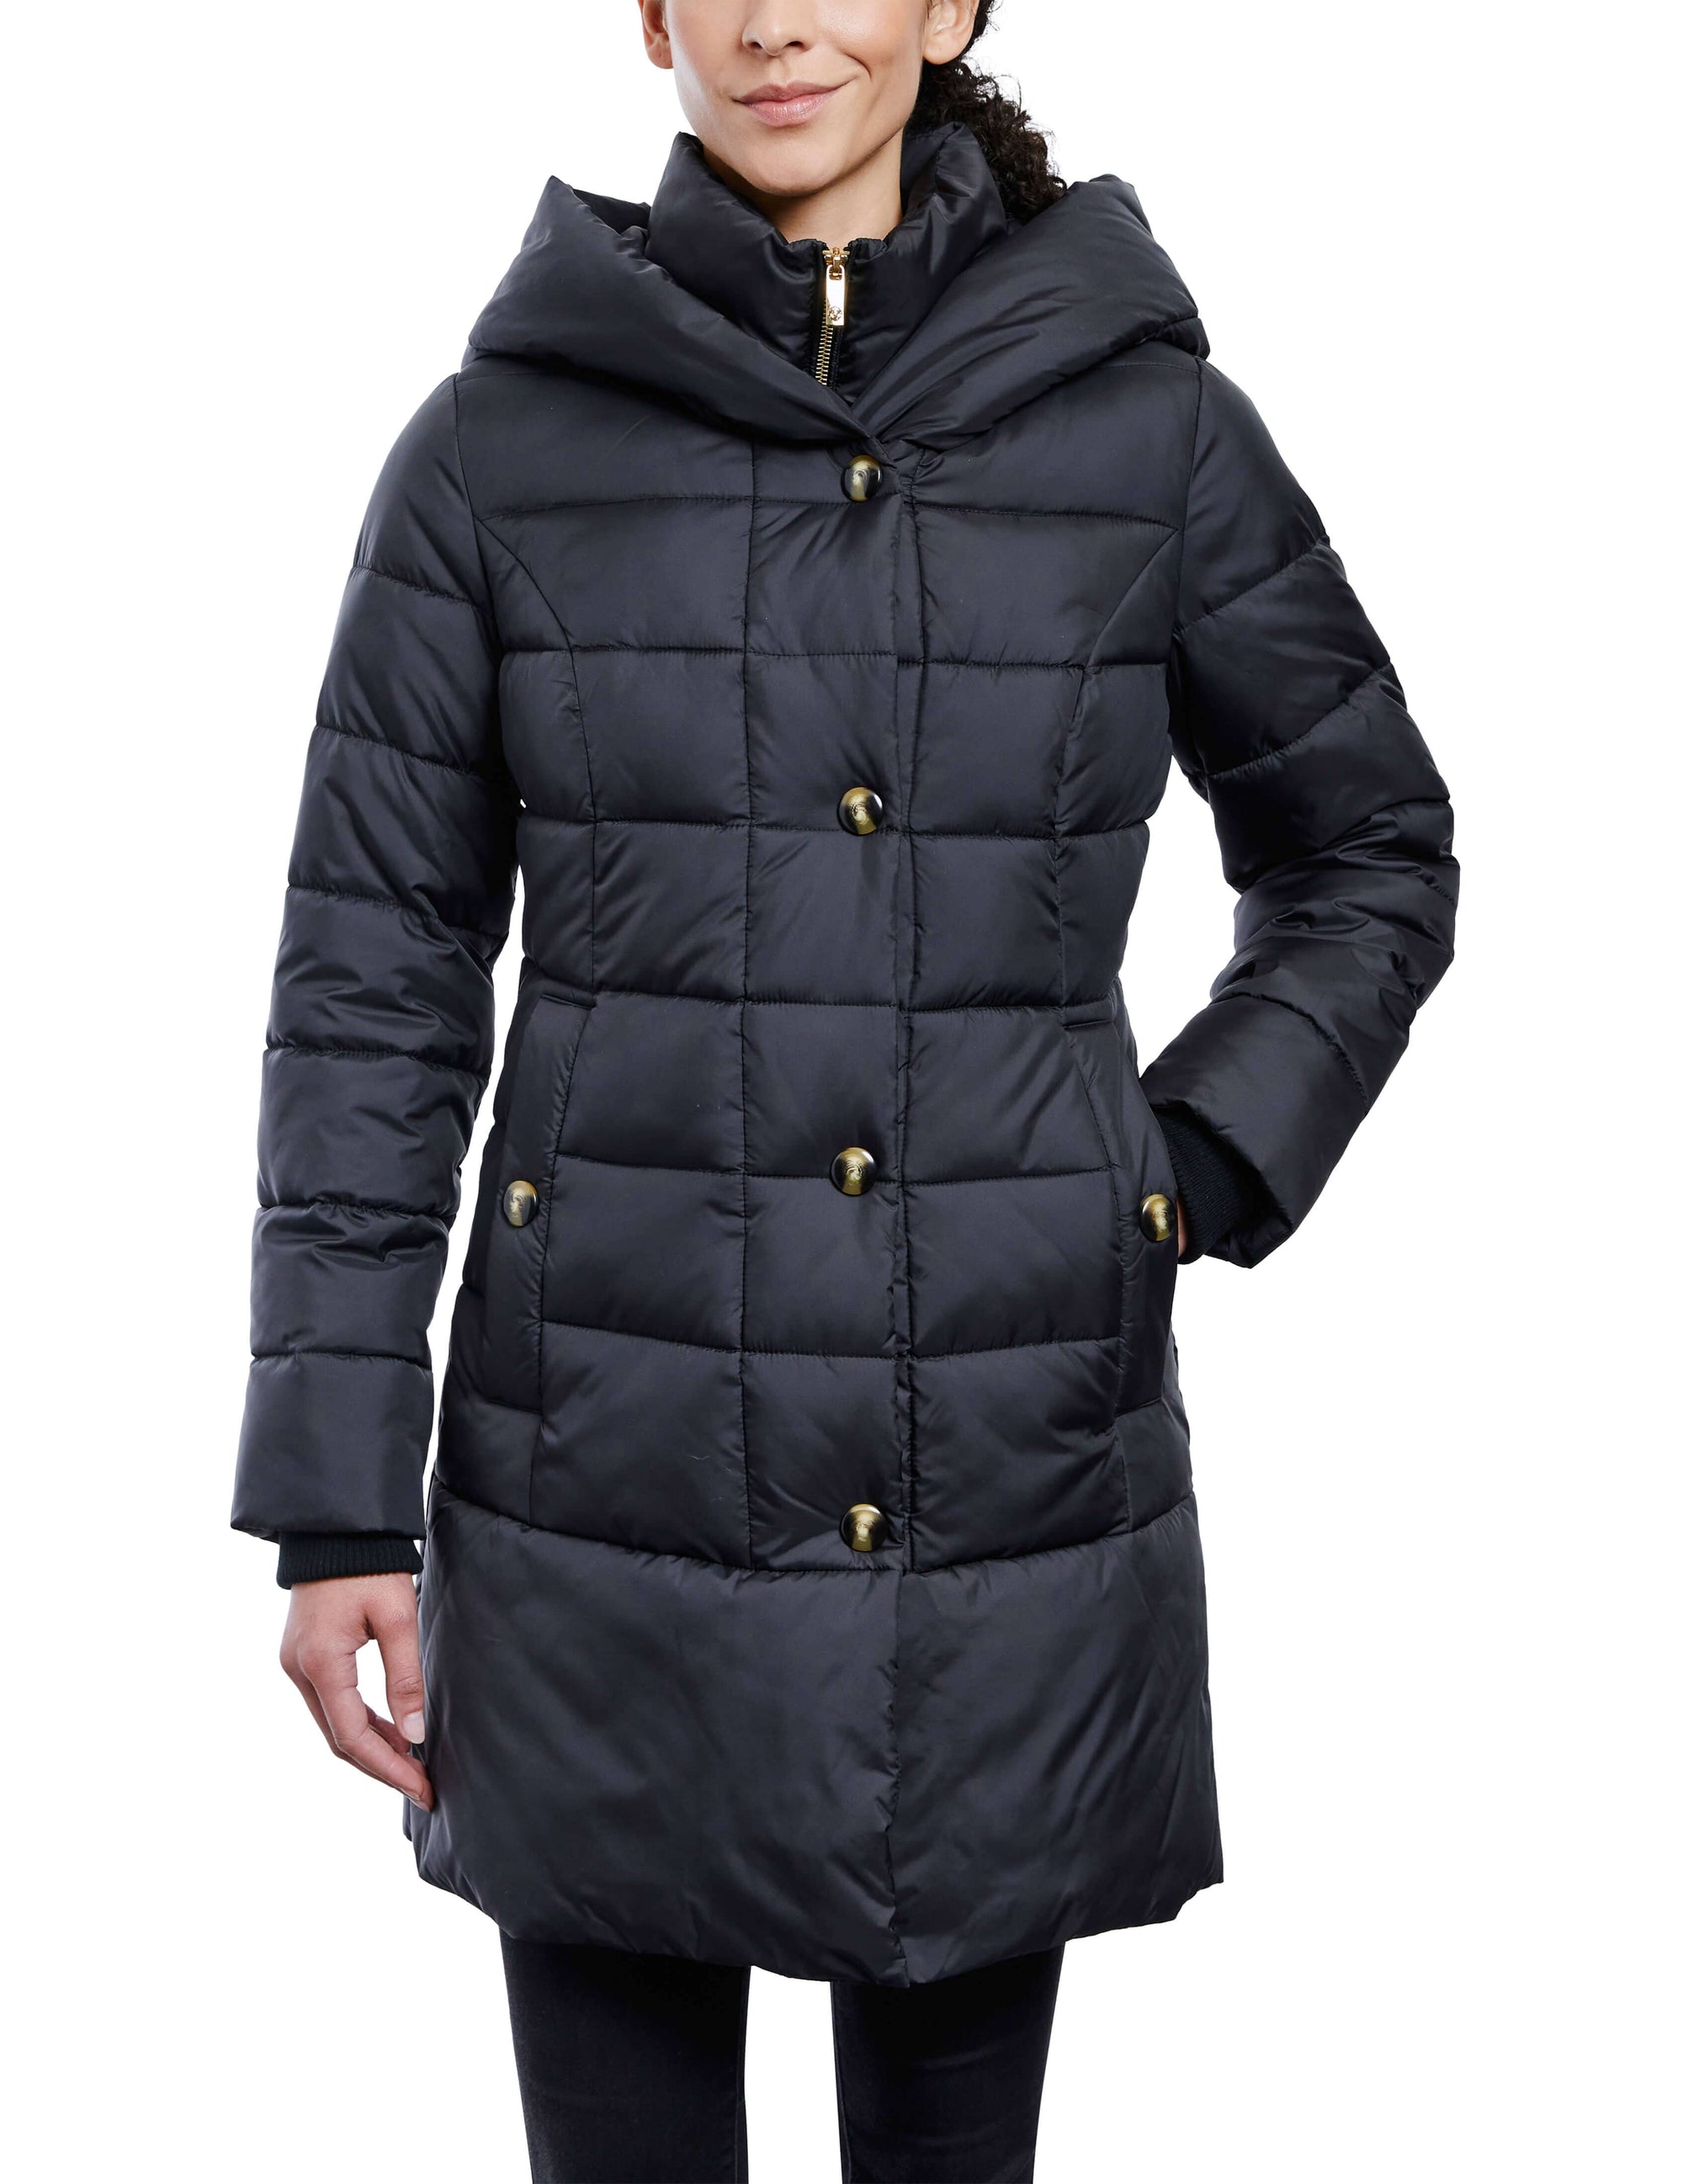 Consider It Snap Front Puffer Jacket